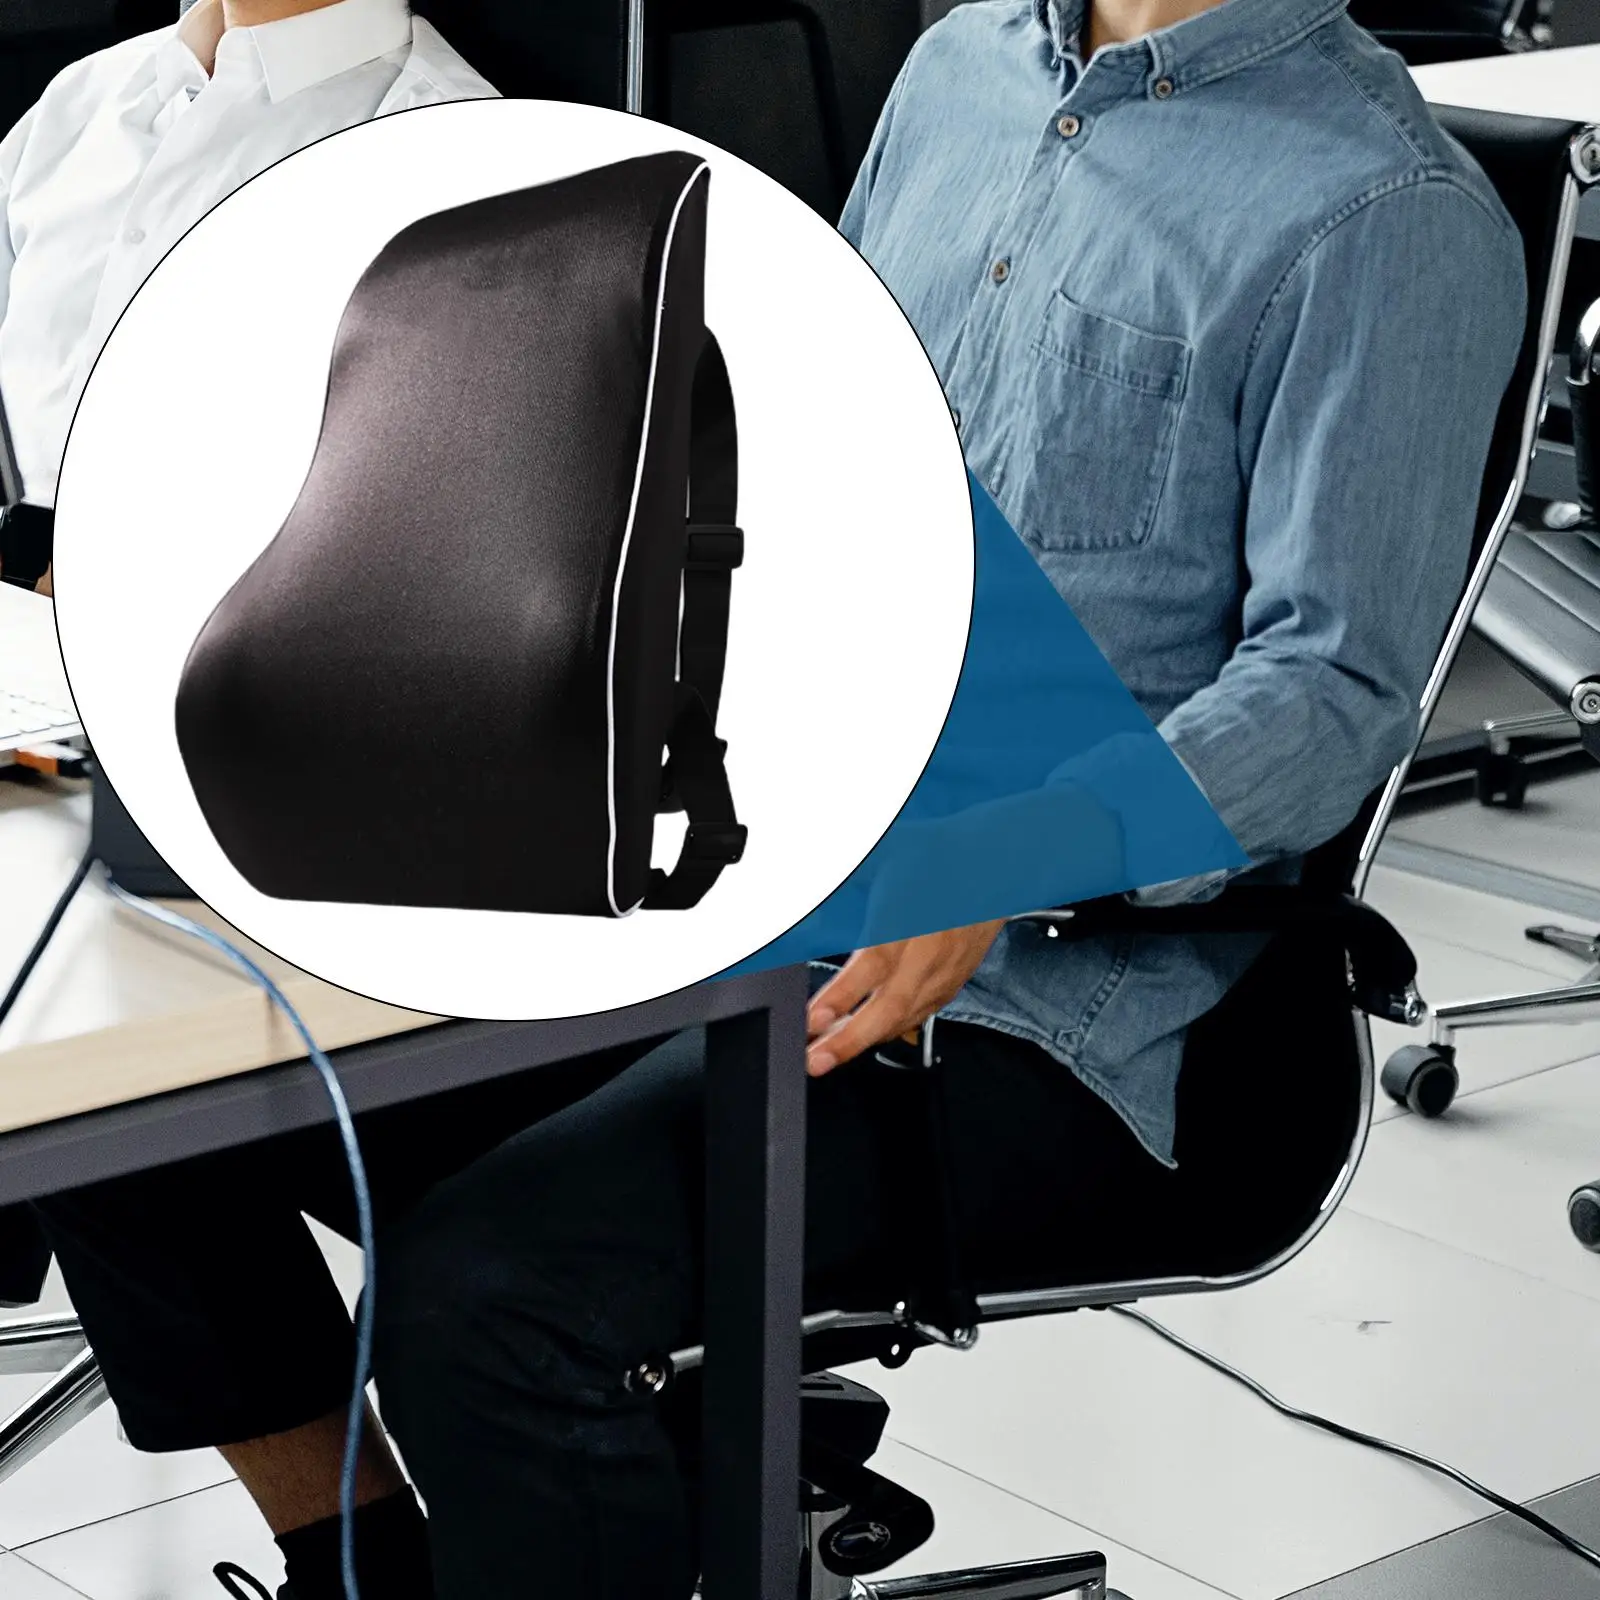 Lumbar s Backrest Relieve Back Pressure Comfort Back Cushion for Computer Chair Home Office Chair Drivers Elderly